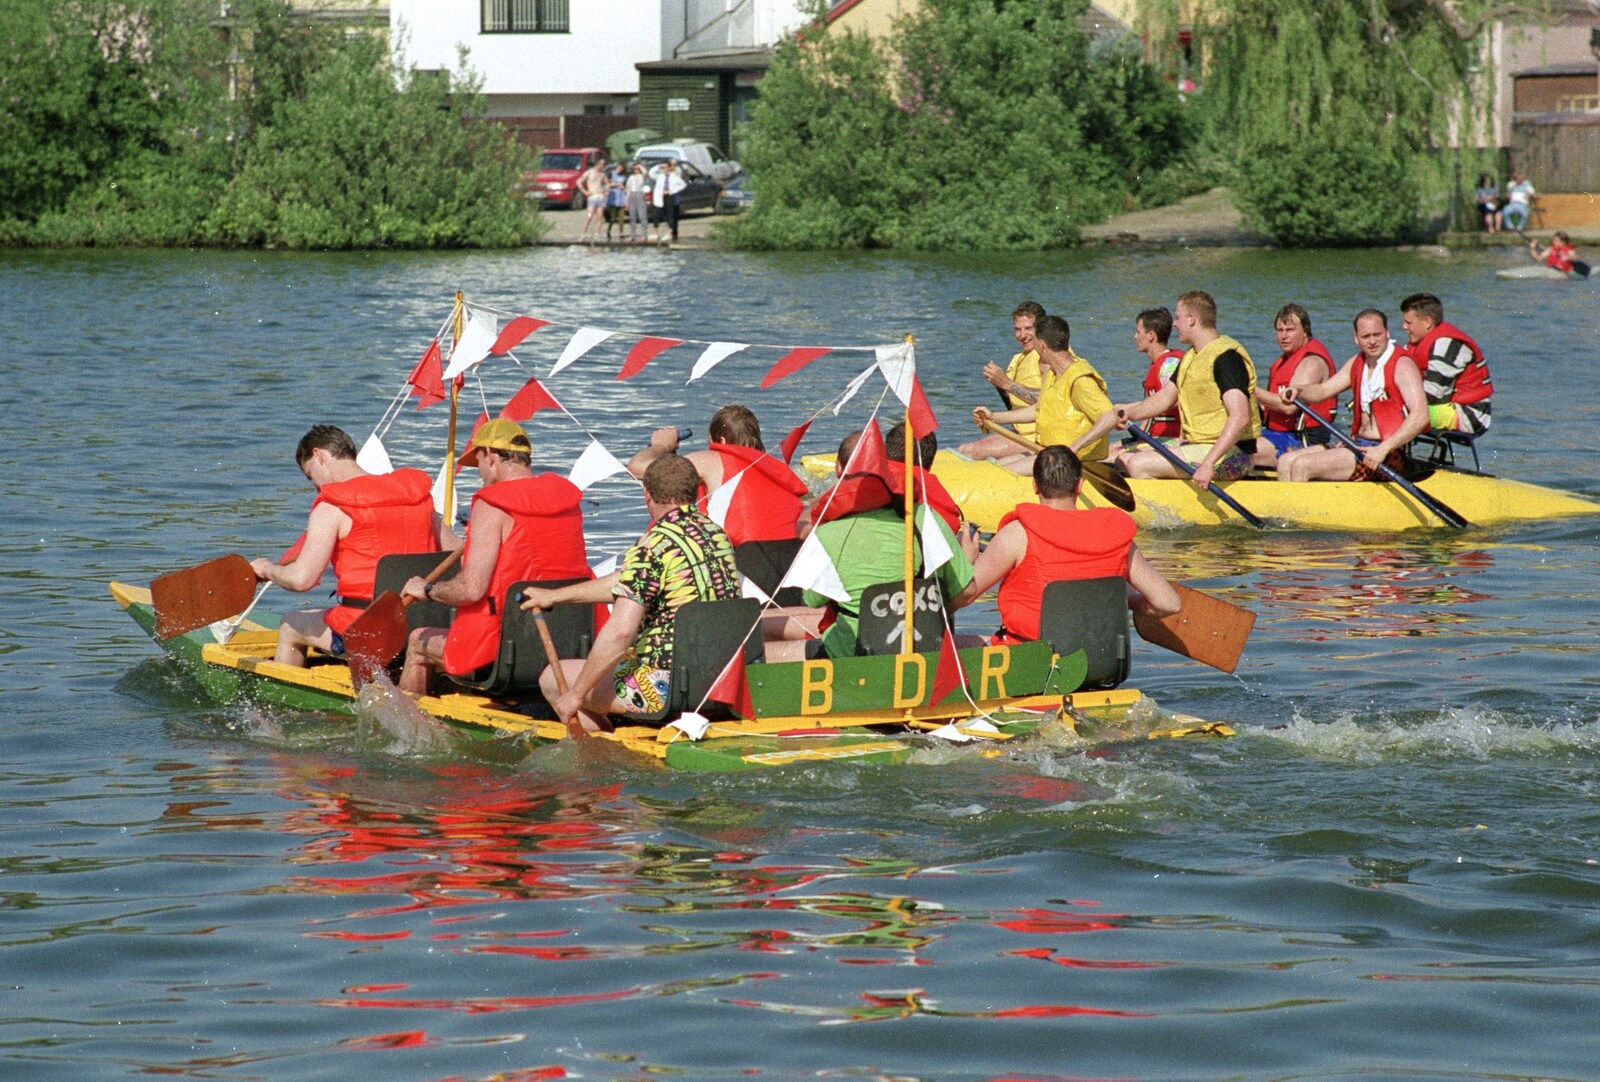 The BDR team paddle around the Mere from The Diss Raft Race, Diss Mere, Norfolk - 6th July 1991